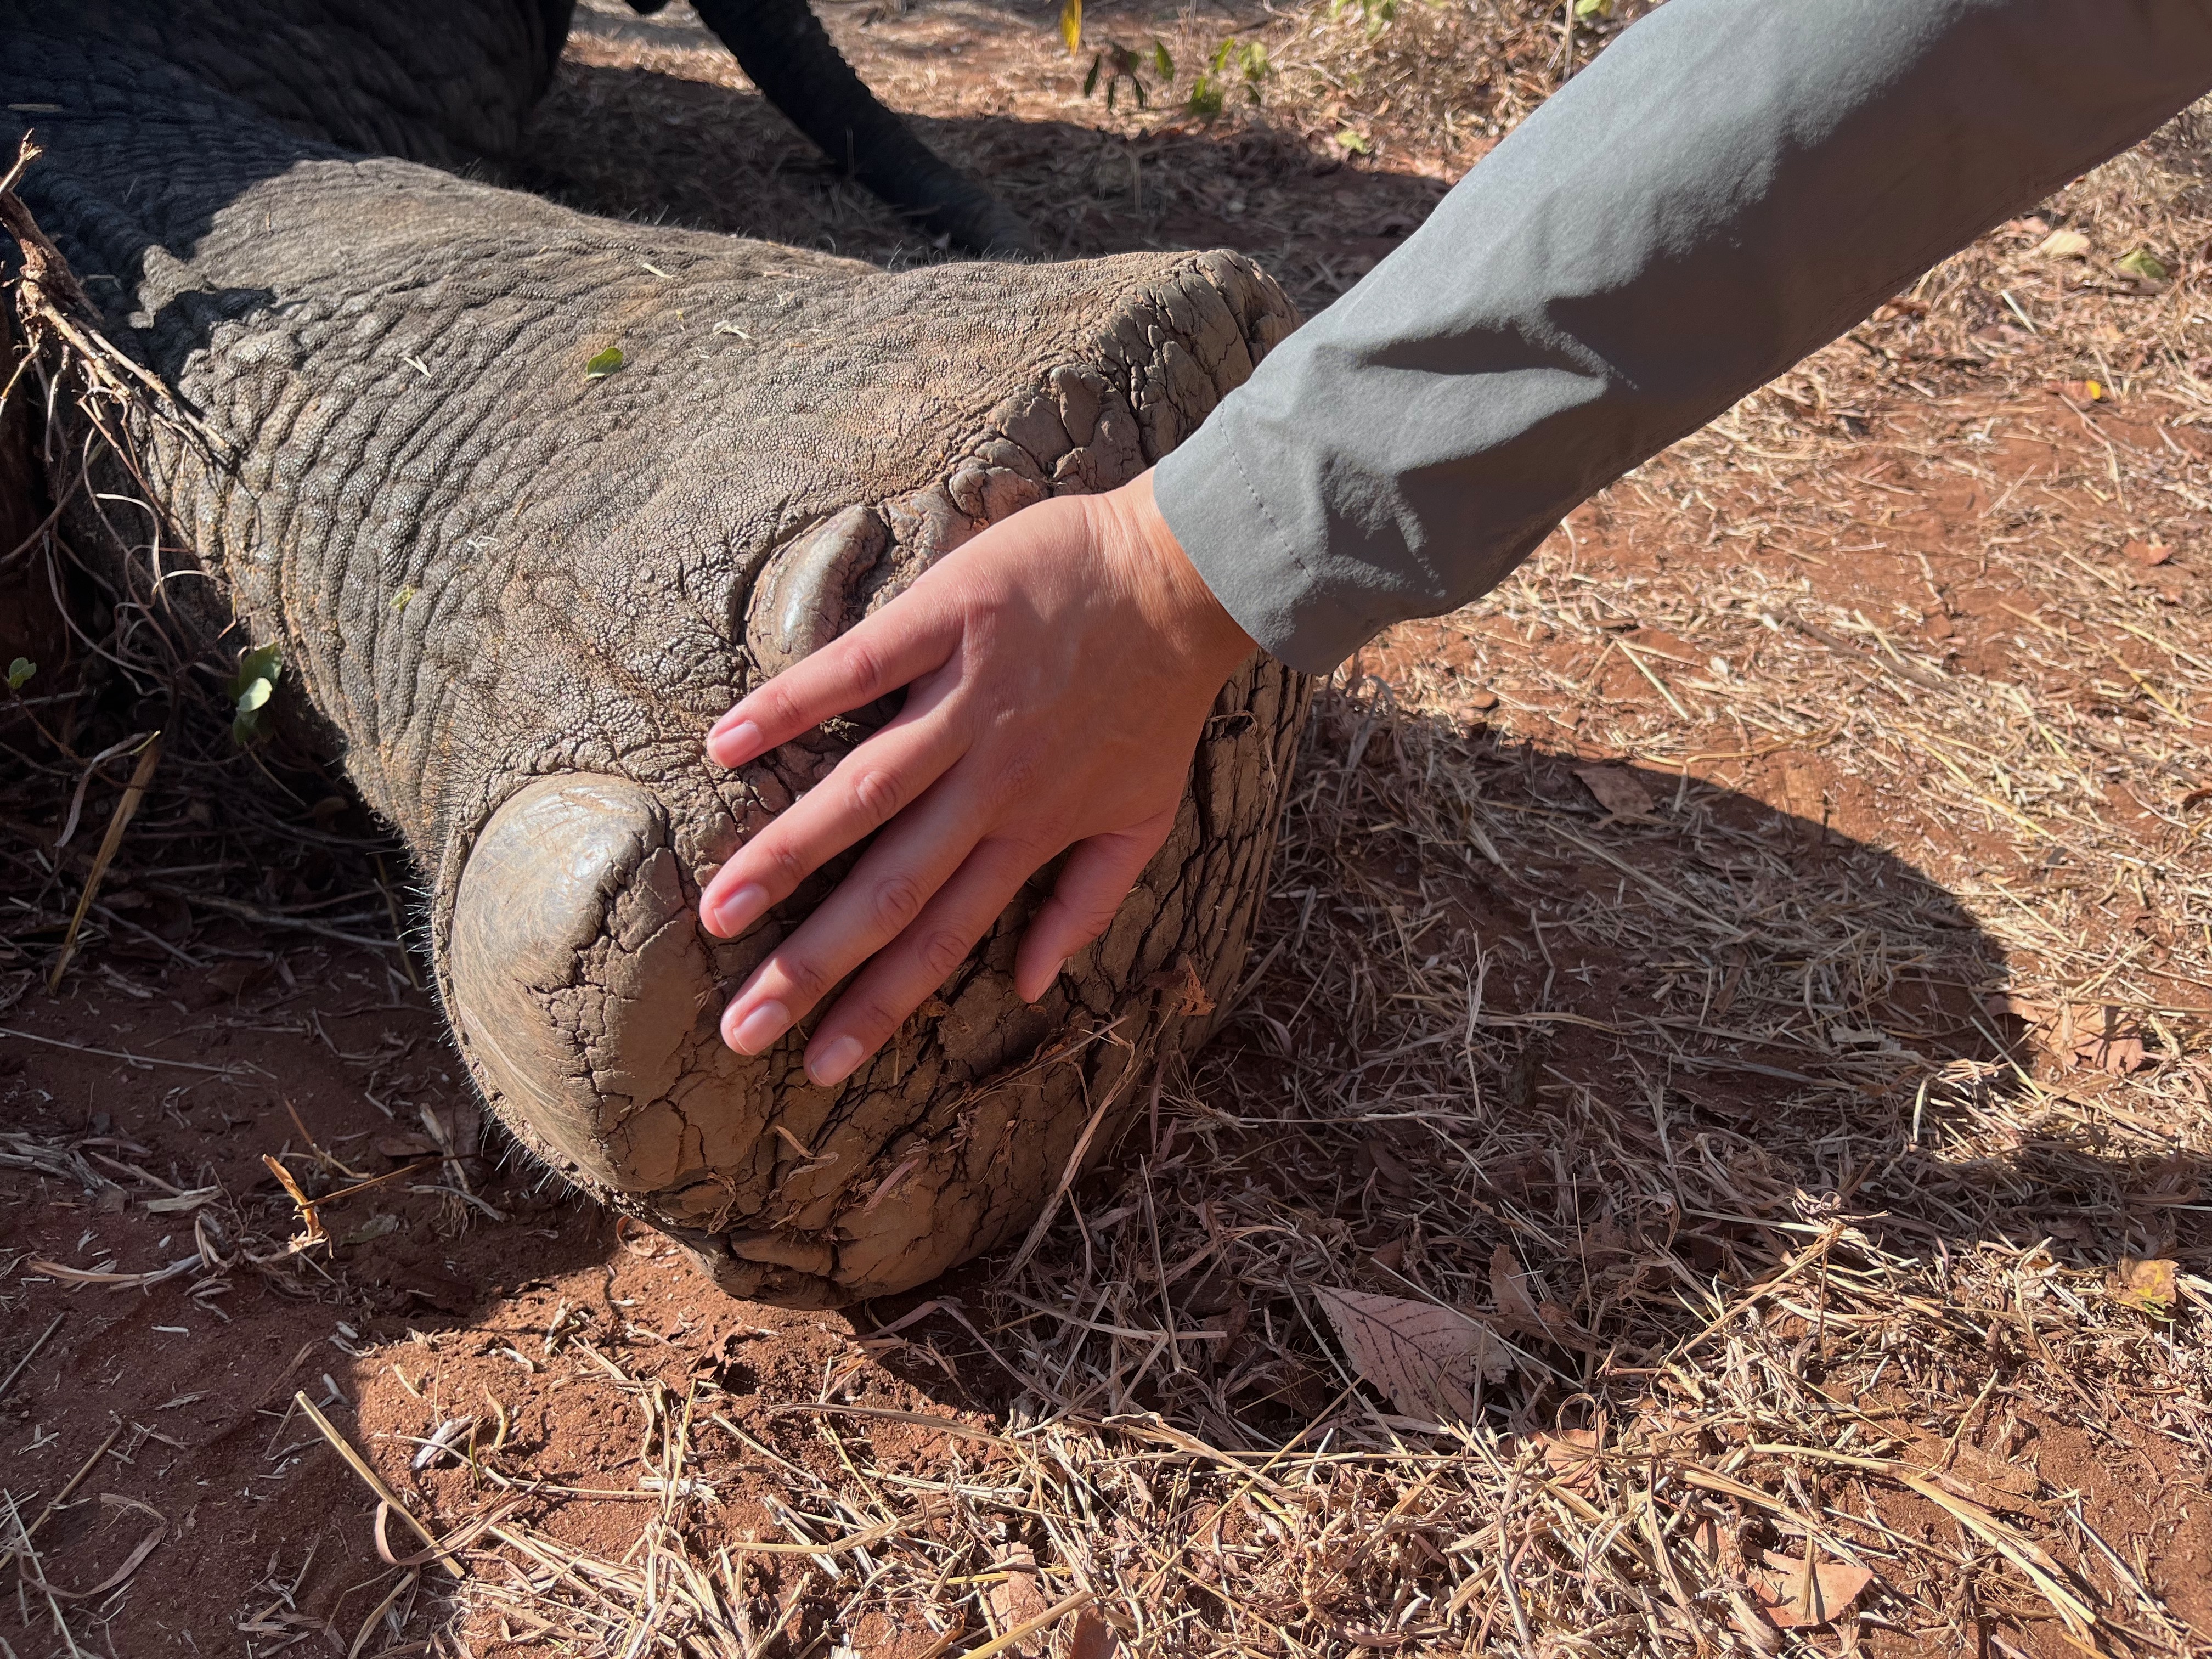 A student compares the size of her hand to a sedated wild elephant, taken while collaring the animal in Zimbabwe